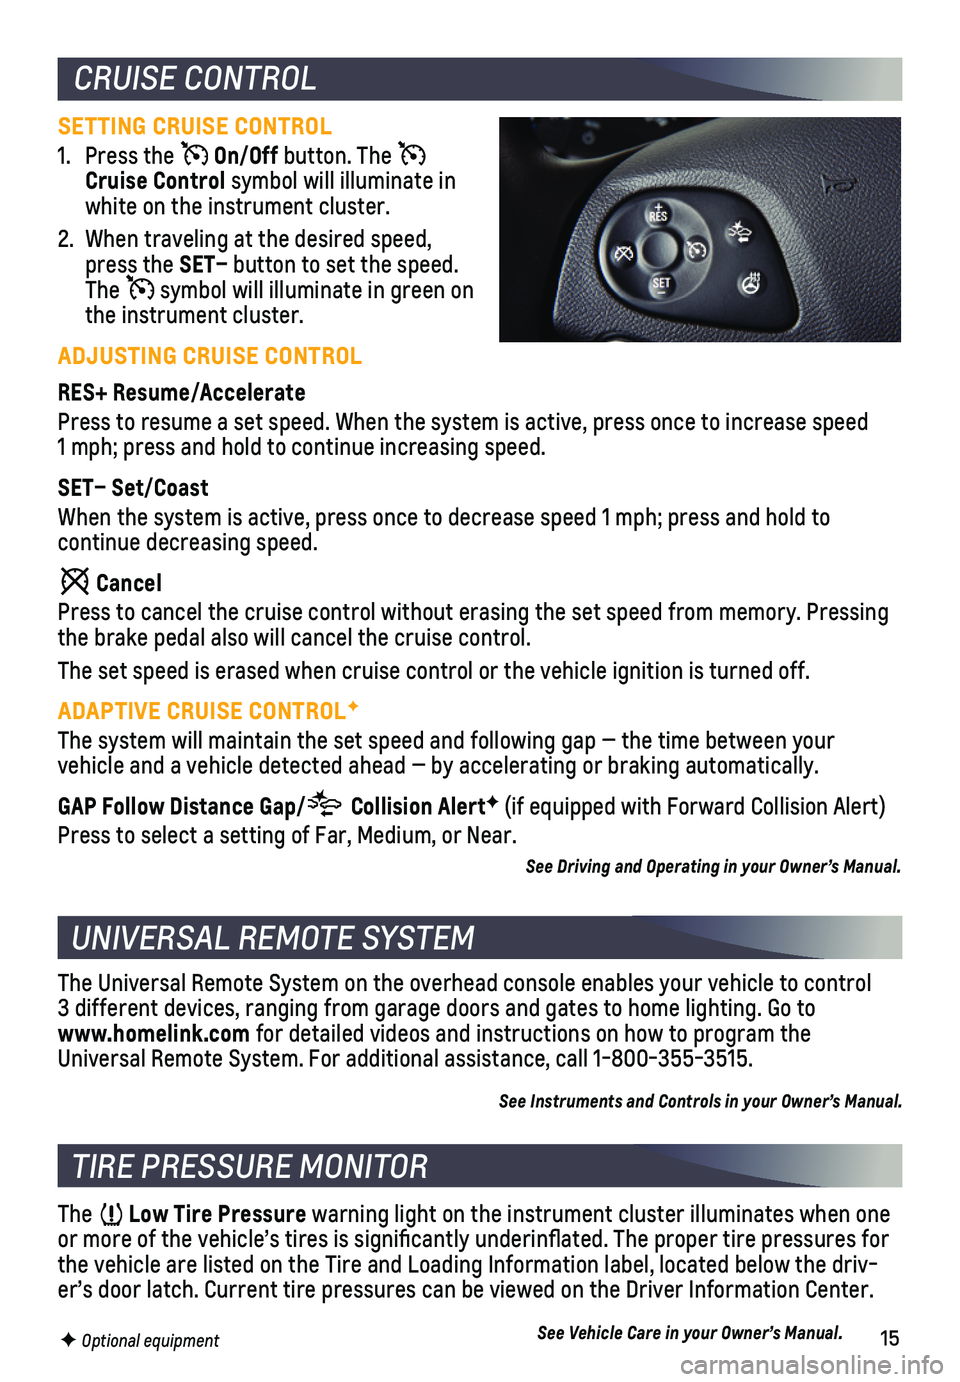 CHEVROLET IMPALA 2018  Get To Know Guide 15
UNIVERSAL REMOTE SYSTEM
TIRE PRESSURE MONITOR 
The Universal Remote System on the overhead console enables your vehicle\
 to control  3 different devices, ranging from garage doors and gates to hom